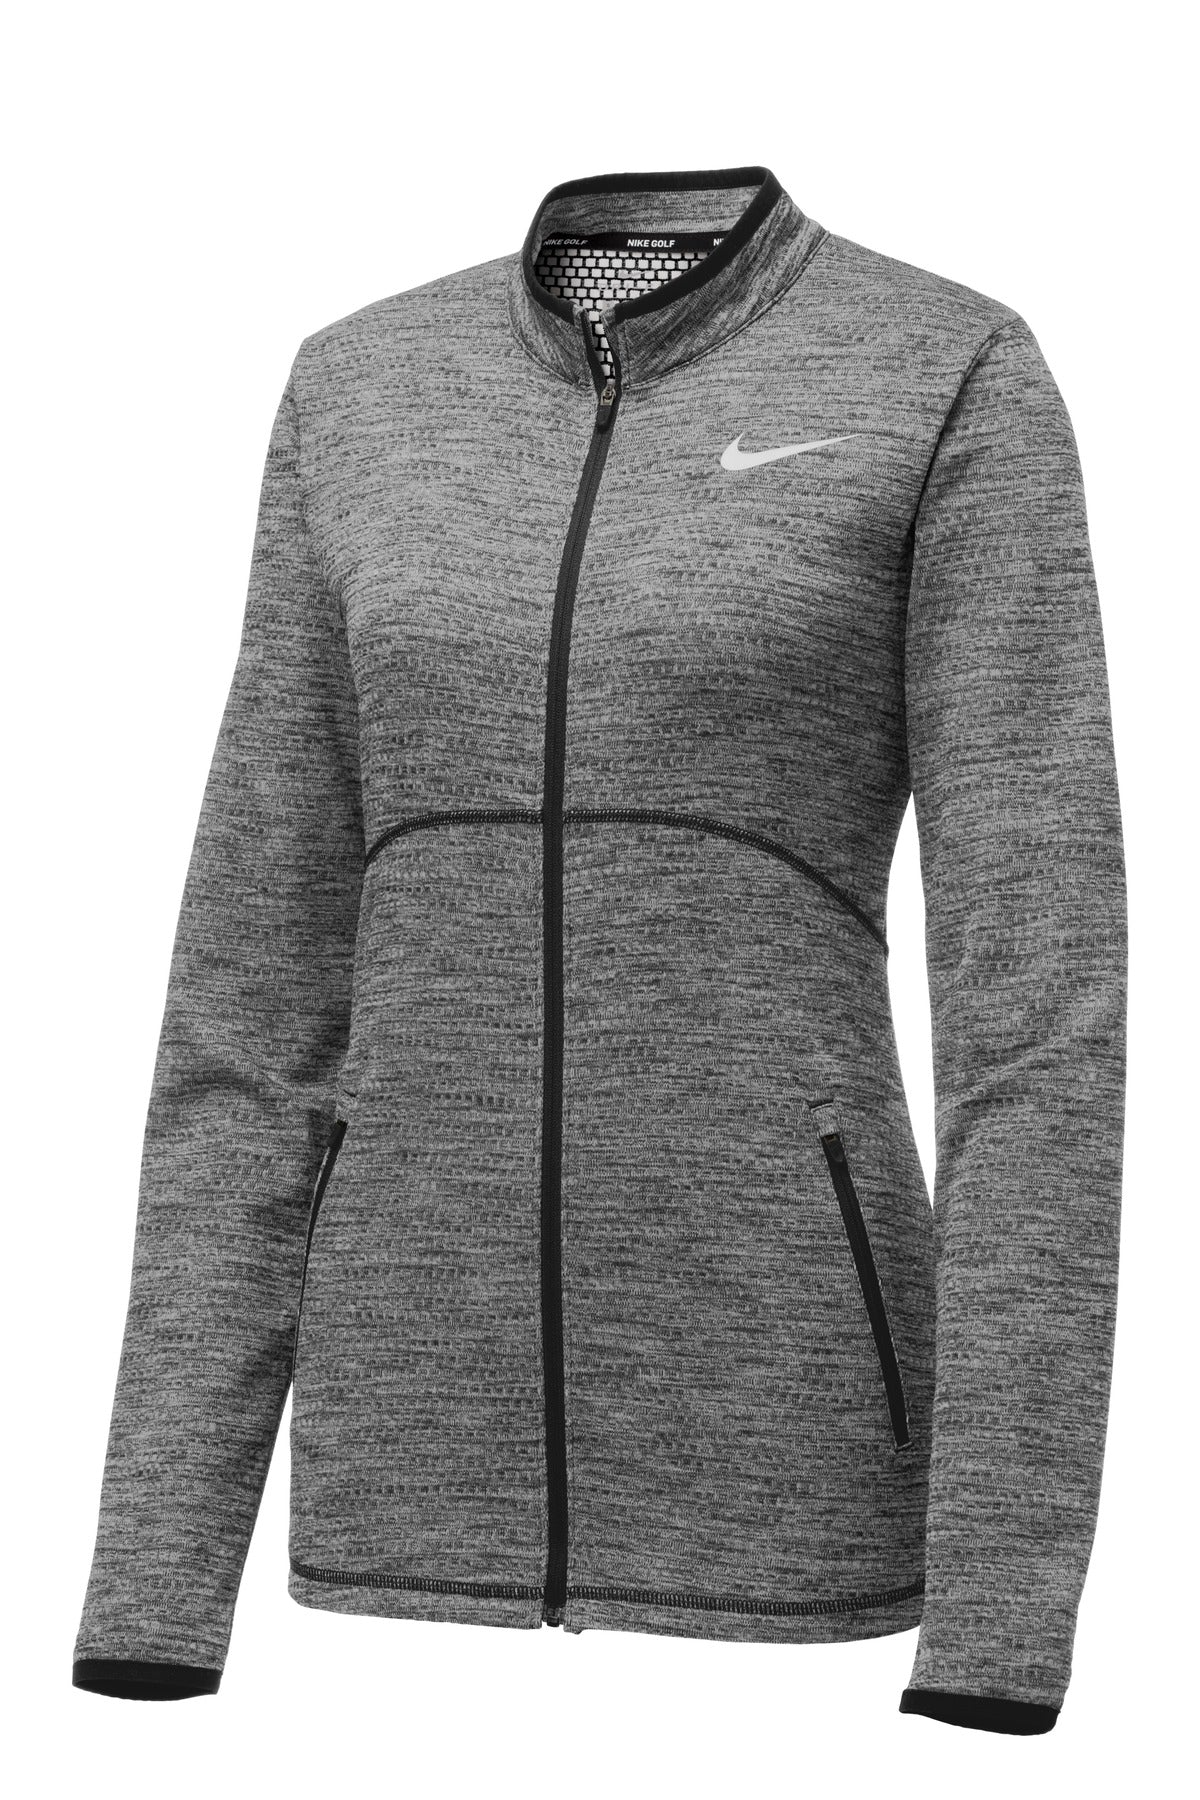 DISCONTINUED Limited Edition Nike Ladies Full-Zip Cover-Up. 884967